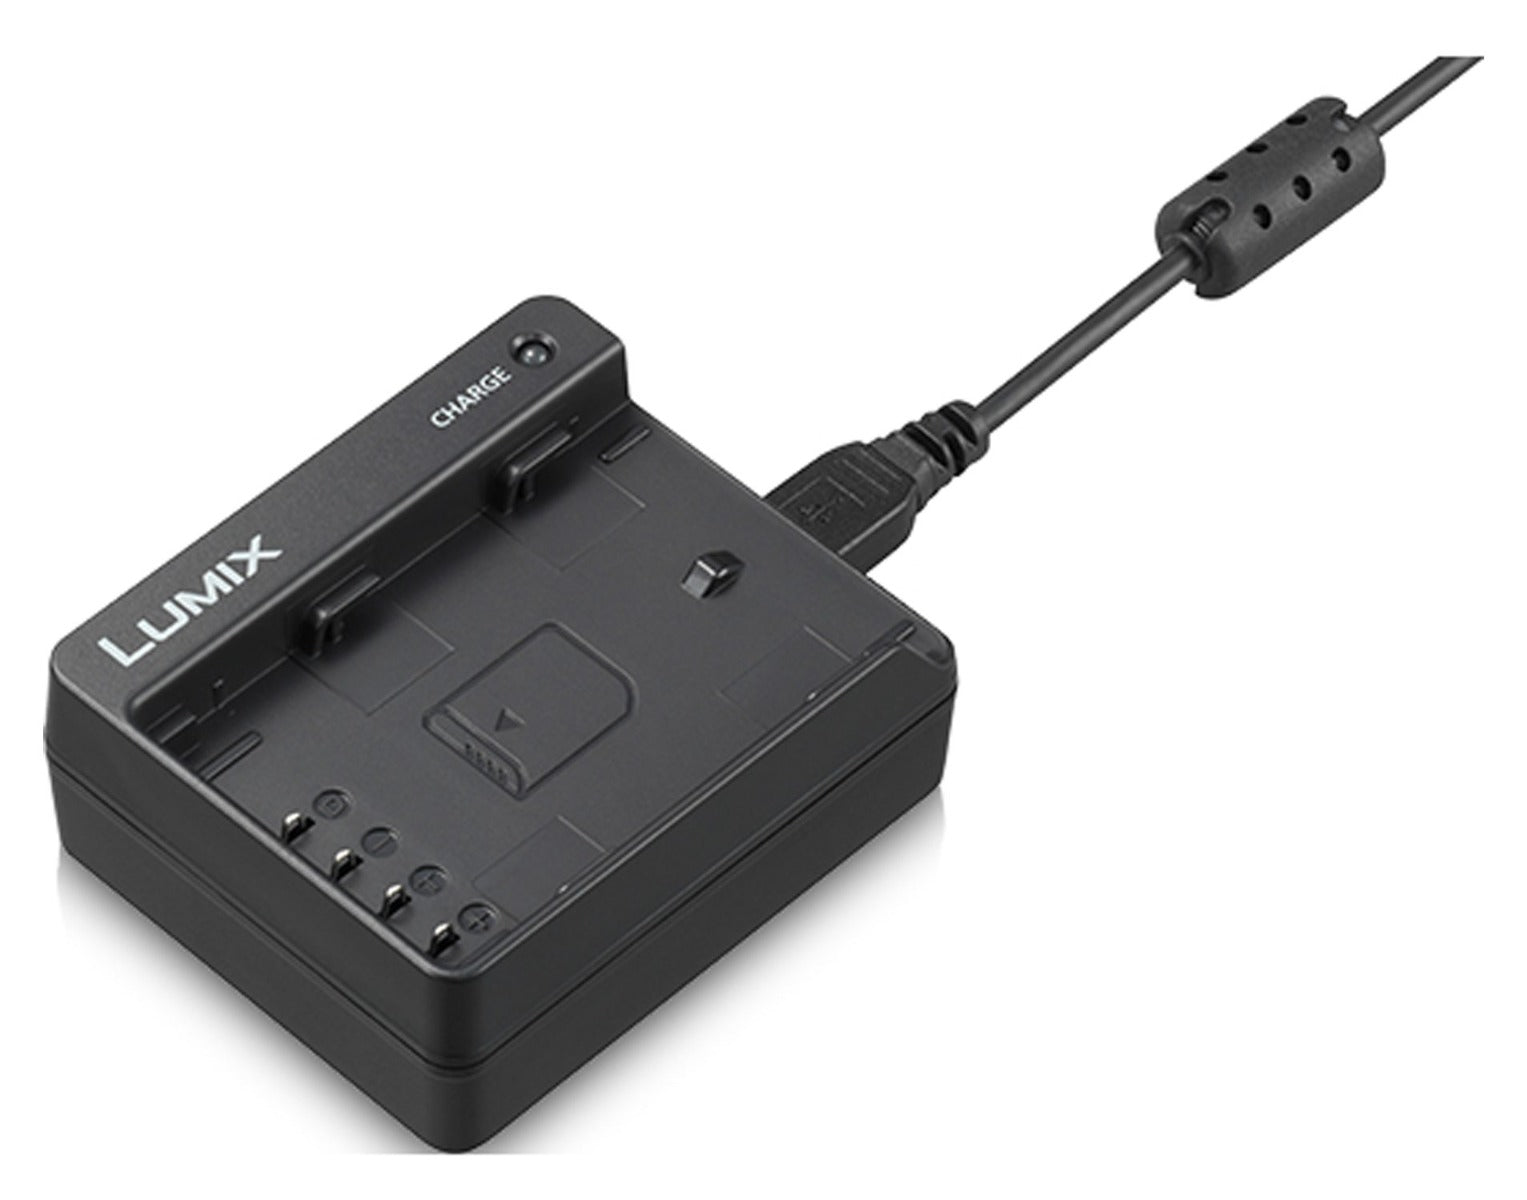 Product Image of Panasonic Lumix DMW-BTC13 battery charger for a DMW-BLF19 battery